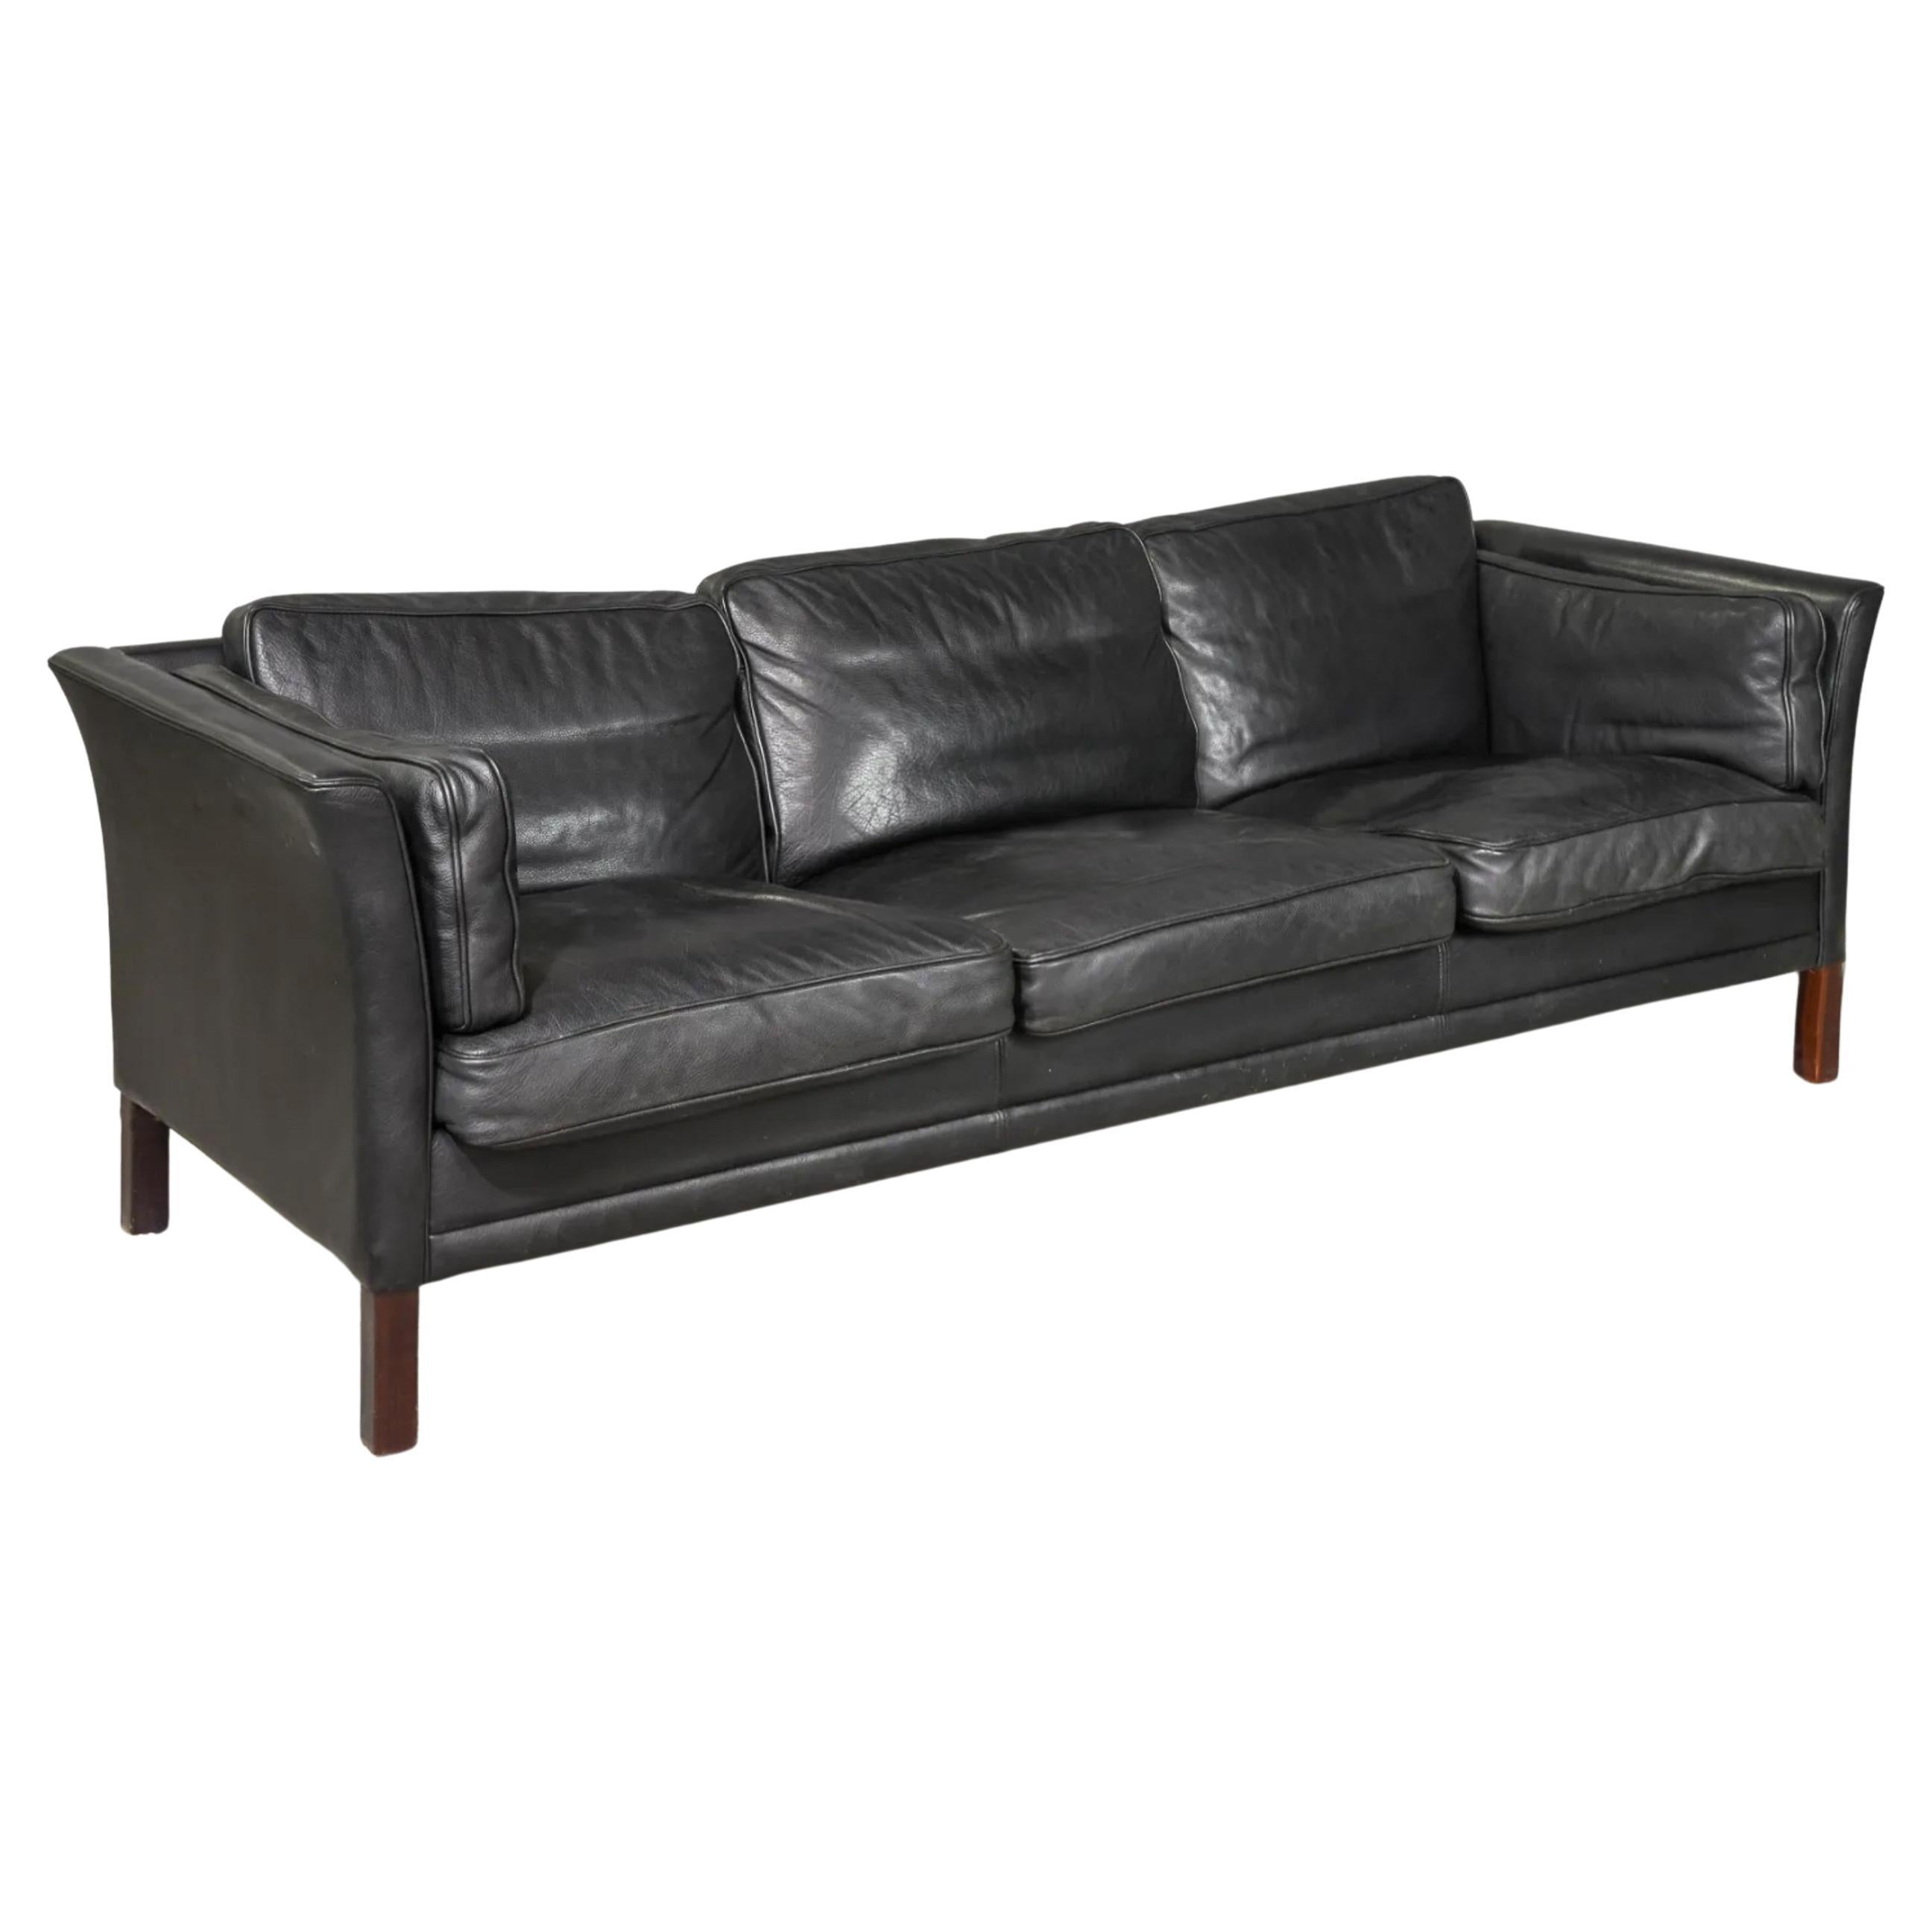 Curved arm Low Mid century Danish modern Black leather 3 seat sofa with rosewood wood legs. Style of Børge Mogensen. Beautiful thick Black leather is soft and shows signs of use but broken in nicely. Great Danish Modern sofa with curved arms. Good